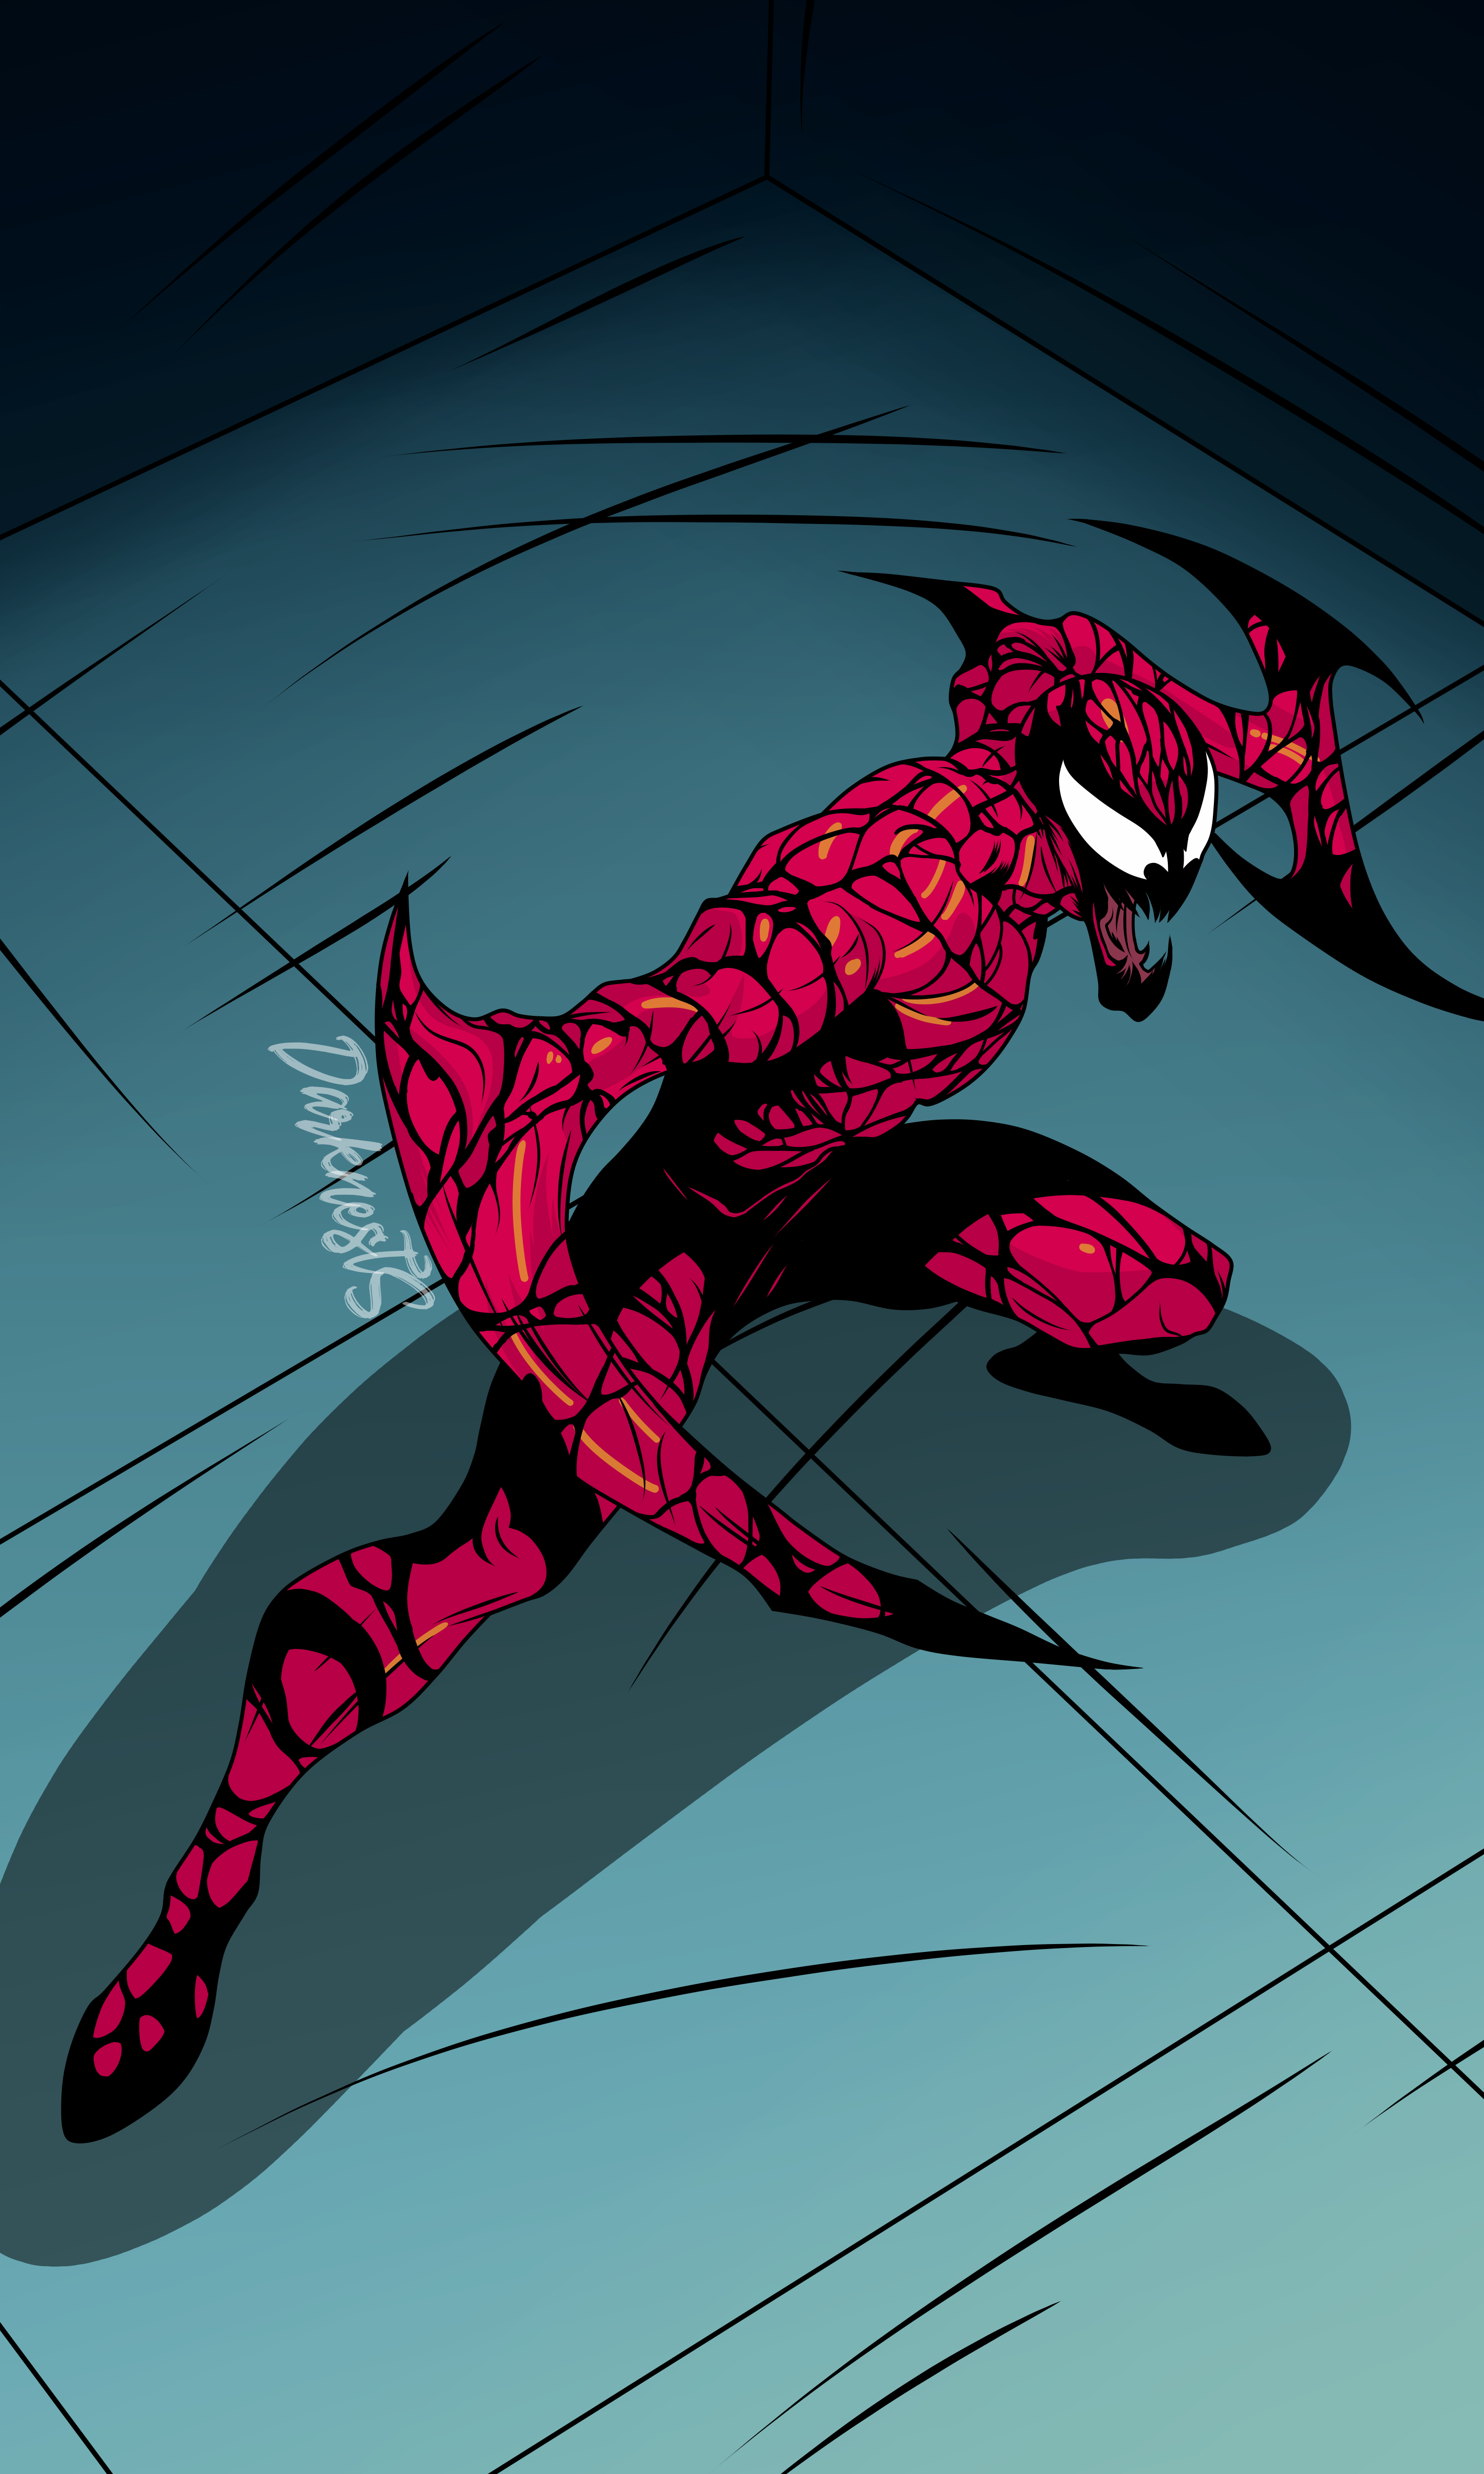 Carnage (The Animated Series Style) by DarknestSpawn on DeviantArt